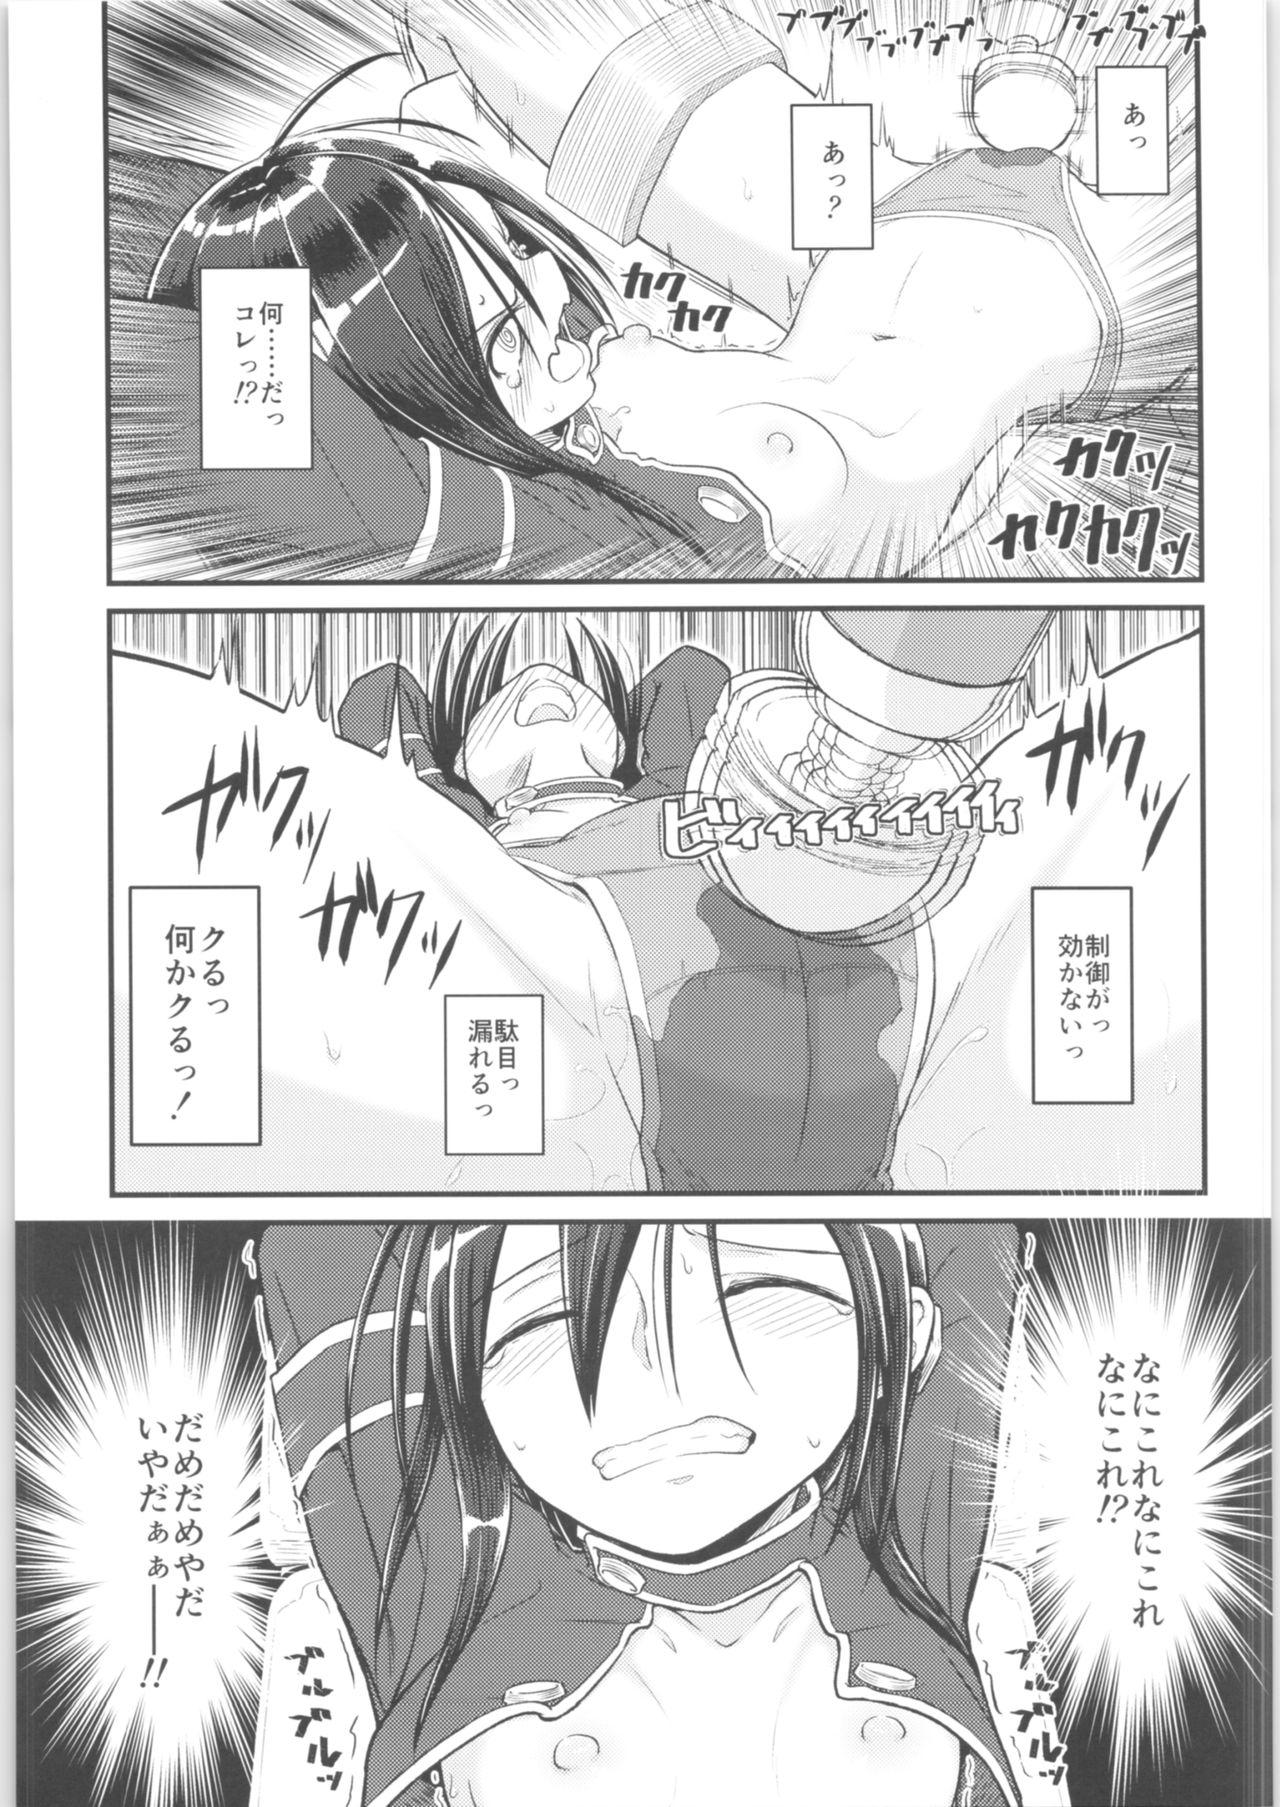 Asshole Another 01 - Sword art online Cuckold - Page 12